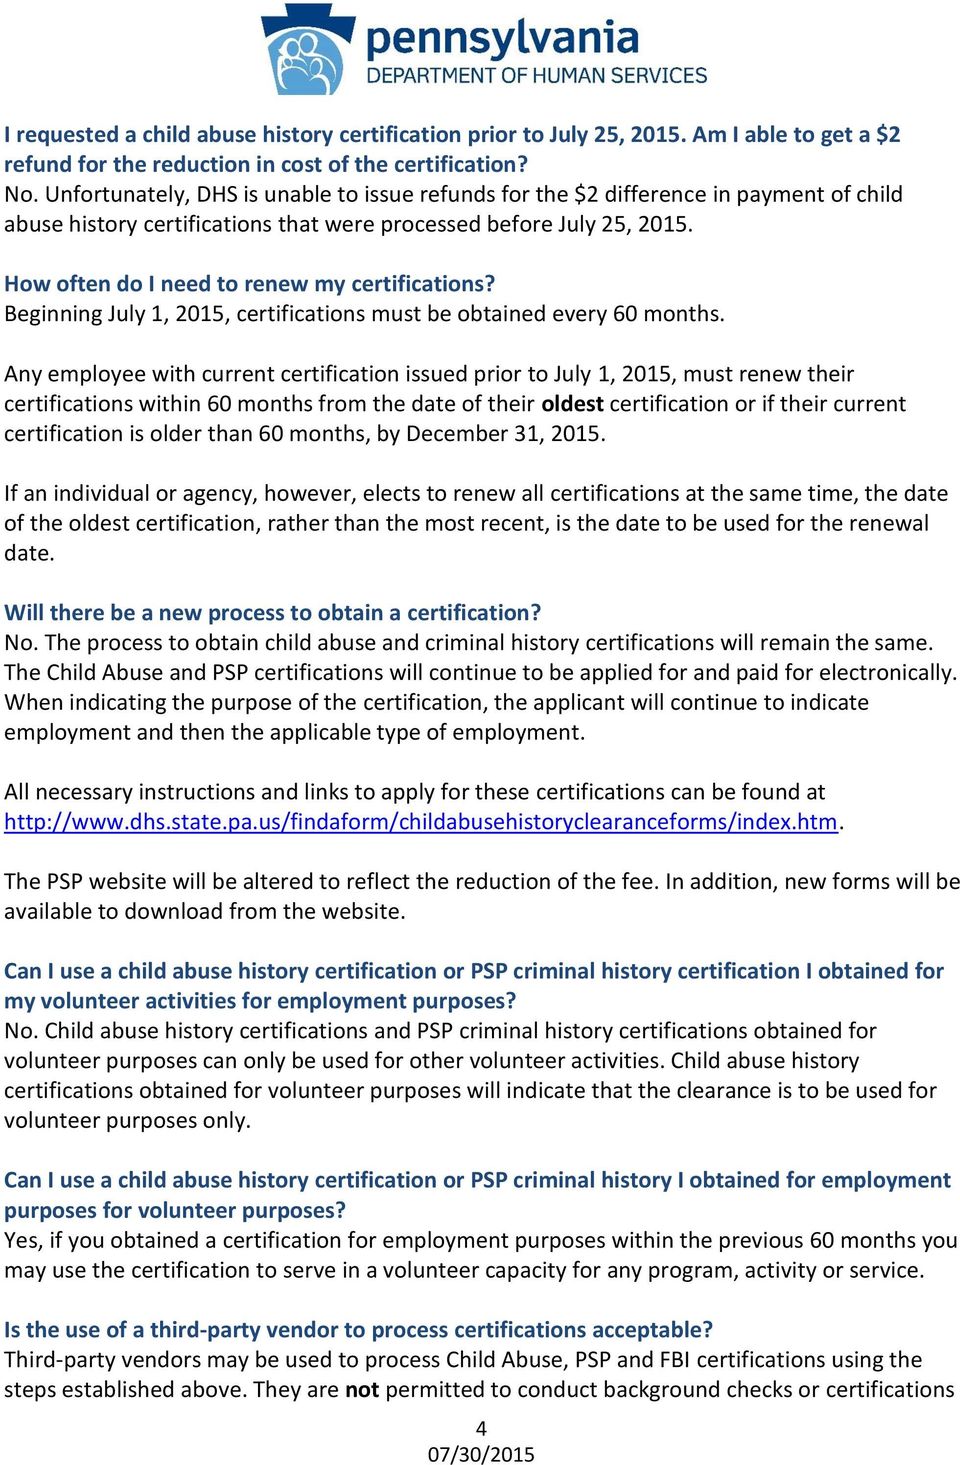 How often do I need to renew my certifications? Beginning July 1, 2015, certifications must be obtained every 60 months.